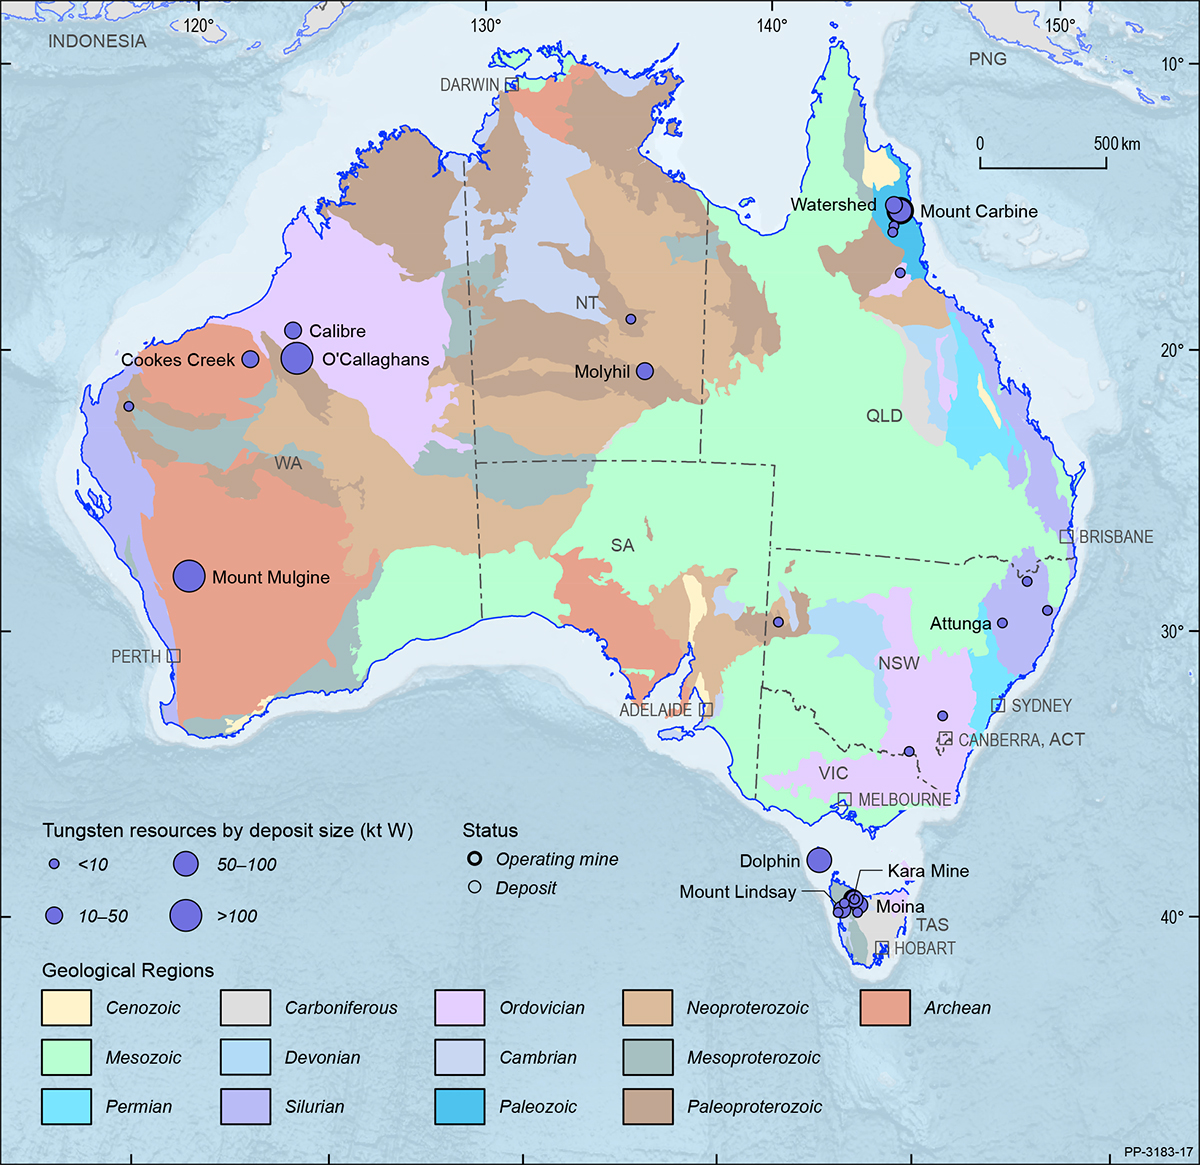 A map showing the Australian continent shaded by the ages of the main geological provinces highlighting the geographical distribution of Australian tungsten deposits and operating mines in 2019.